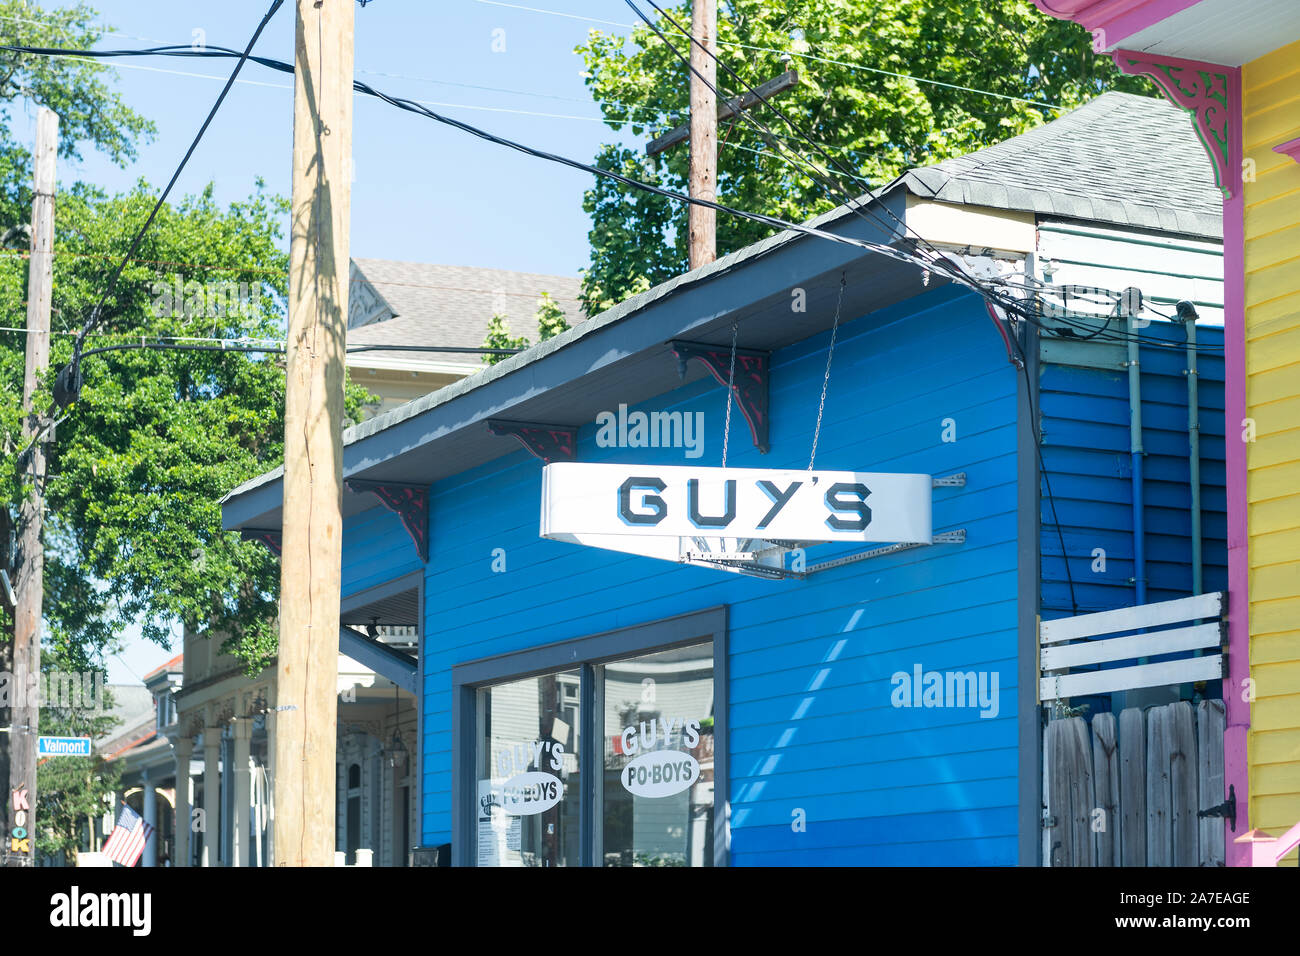 New Orleans, USA - April 23, 2018: Magazine street in Garden district in Louisiana town city with sign for Guy's Po-Boys famous food shop restaurant s Stock Photo